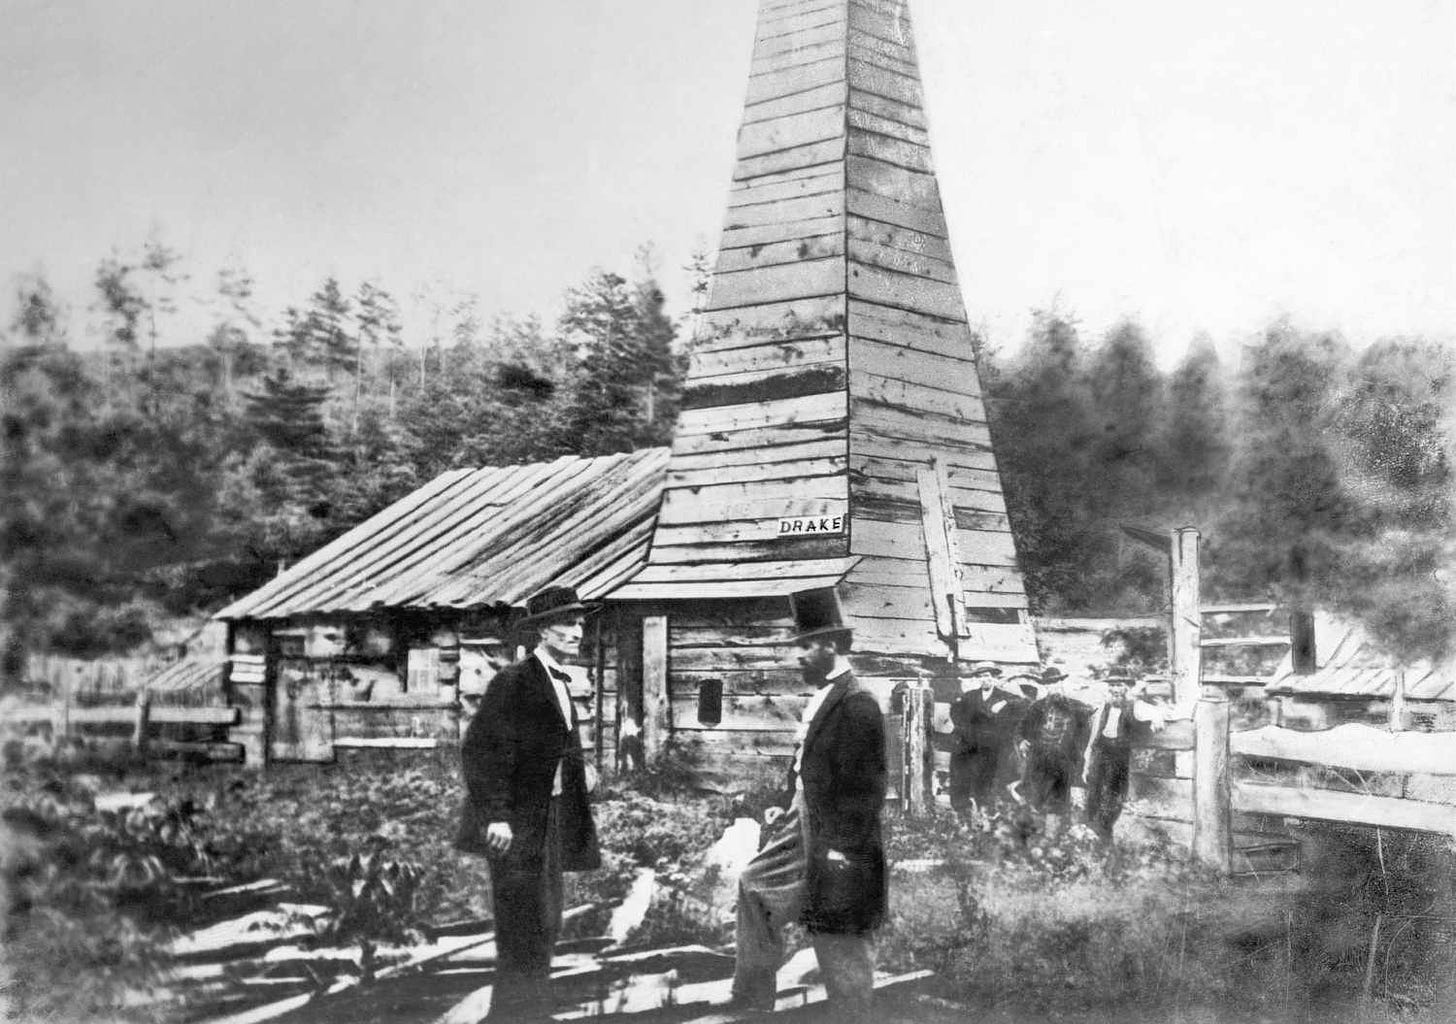 First Oil Well Inventor Edwin Drake